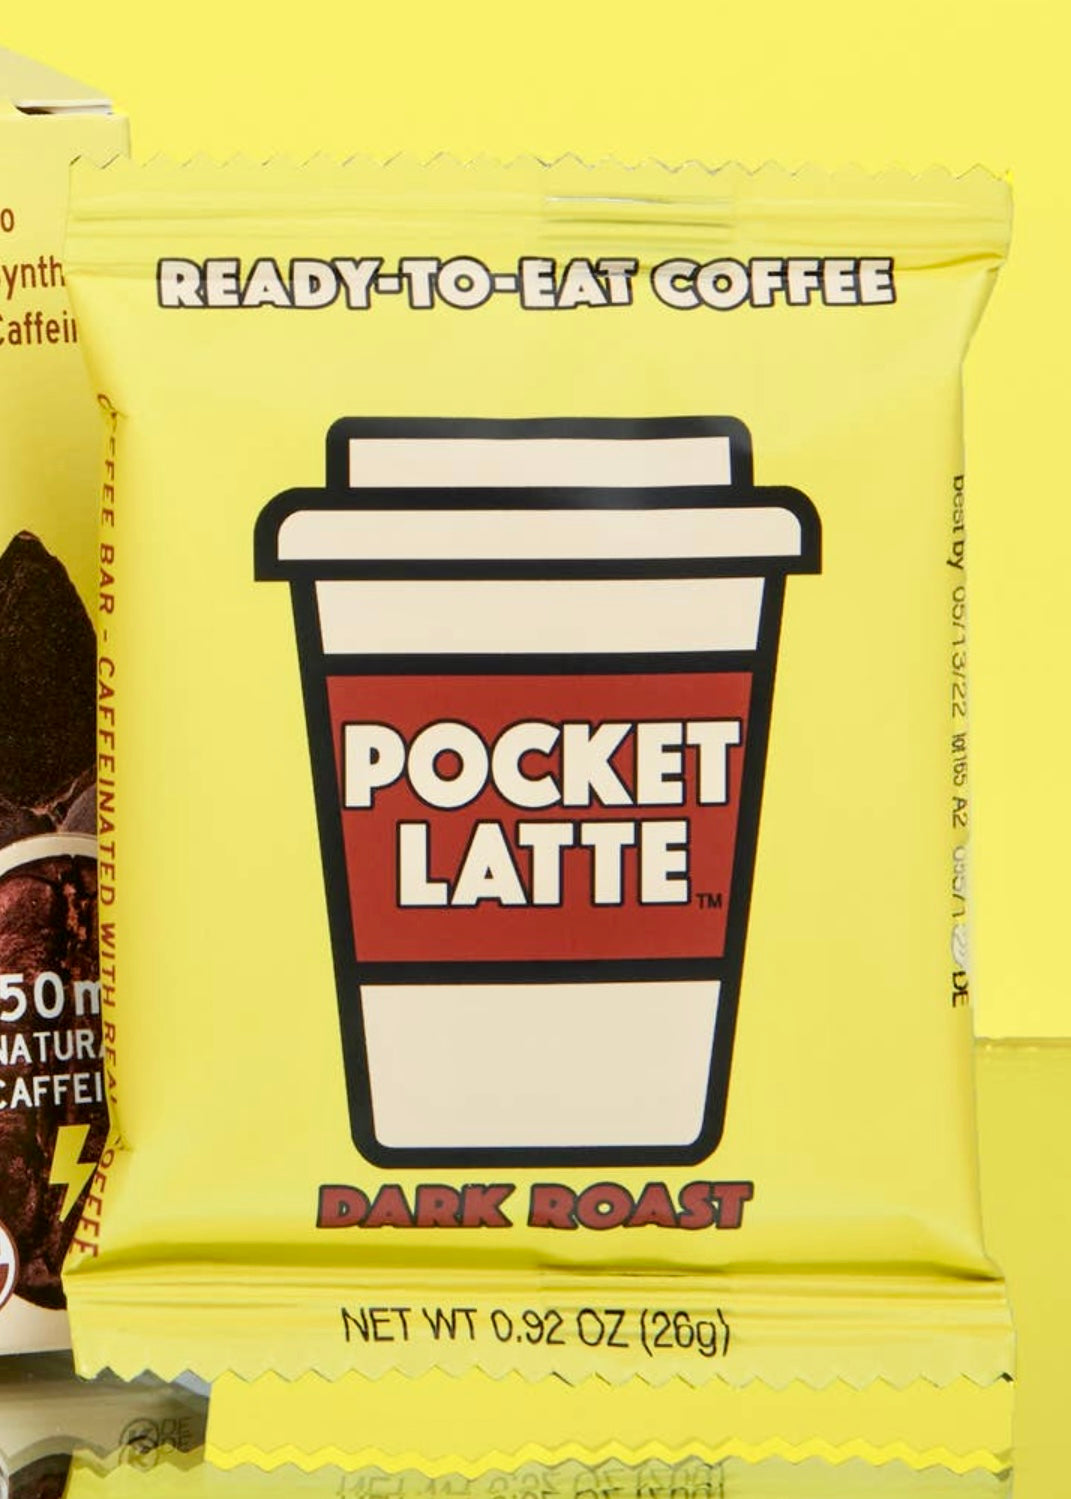 Dark Roast ready to eat coffee chocolate bar by Pocket Latte Sold at Le Monkey House